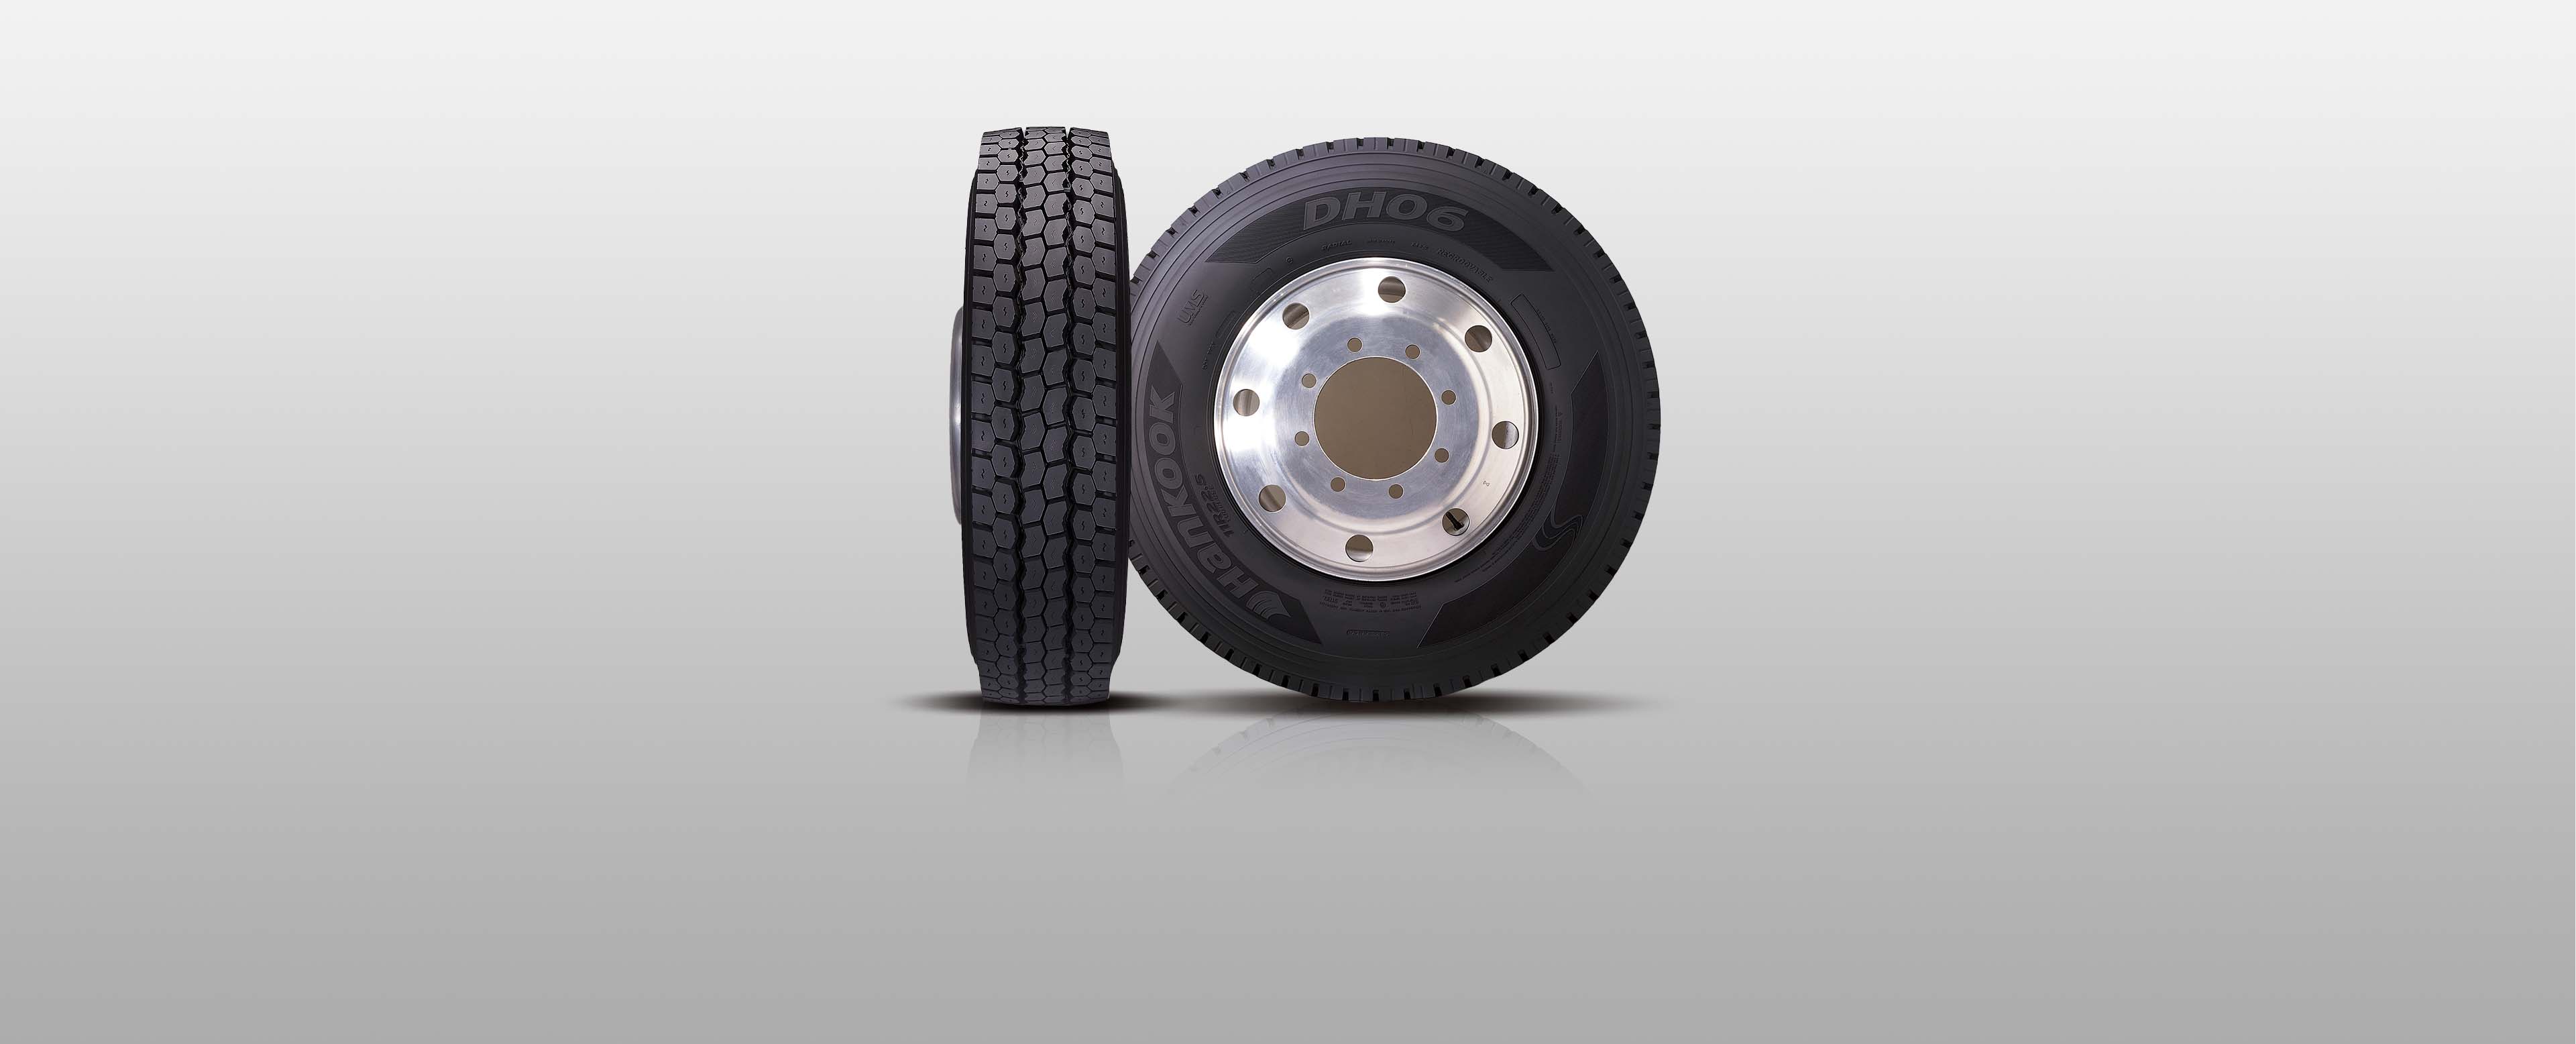 Hankook Tire & Technology-Tires-Smart-DH06-Longer mileage and high traction tire for medium haul